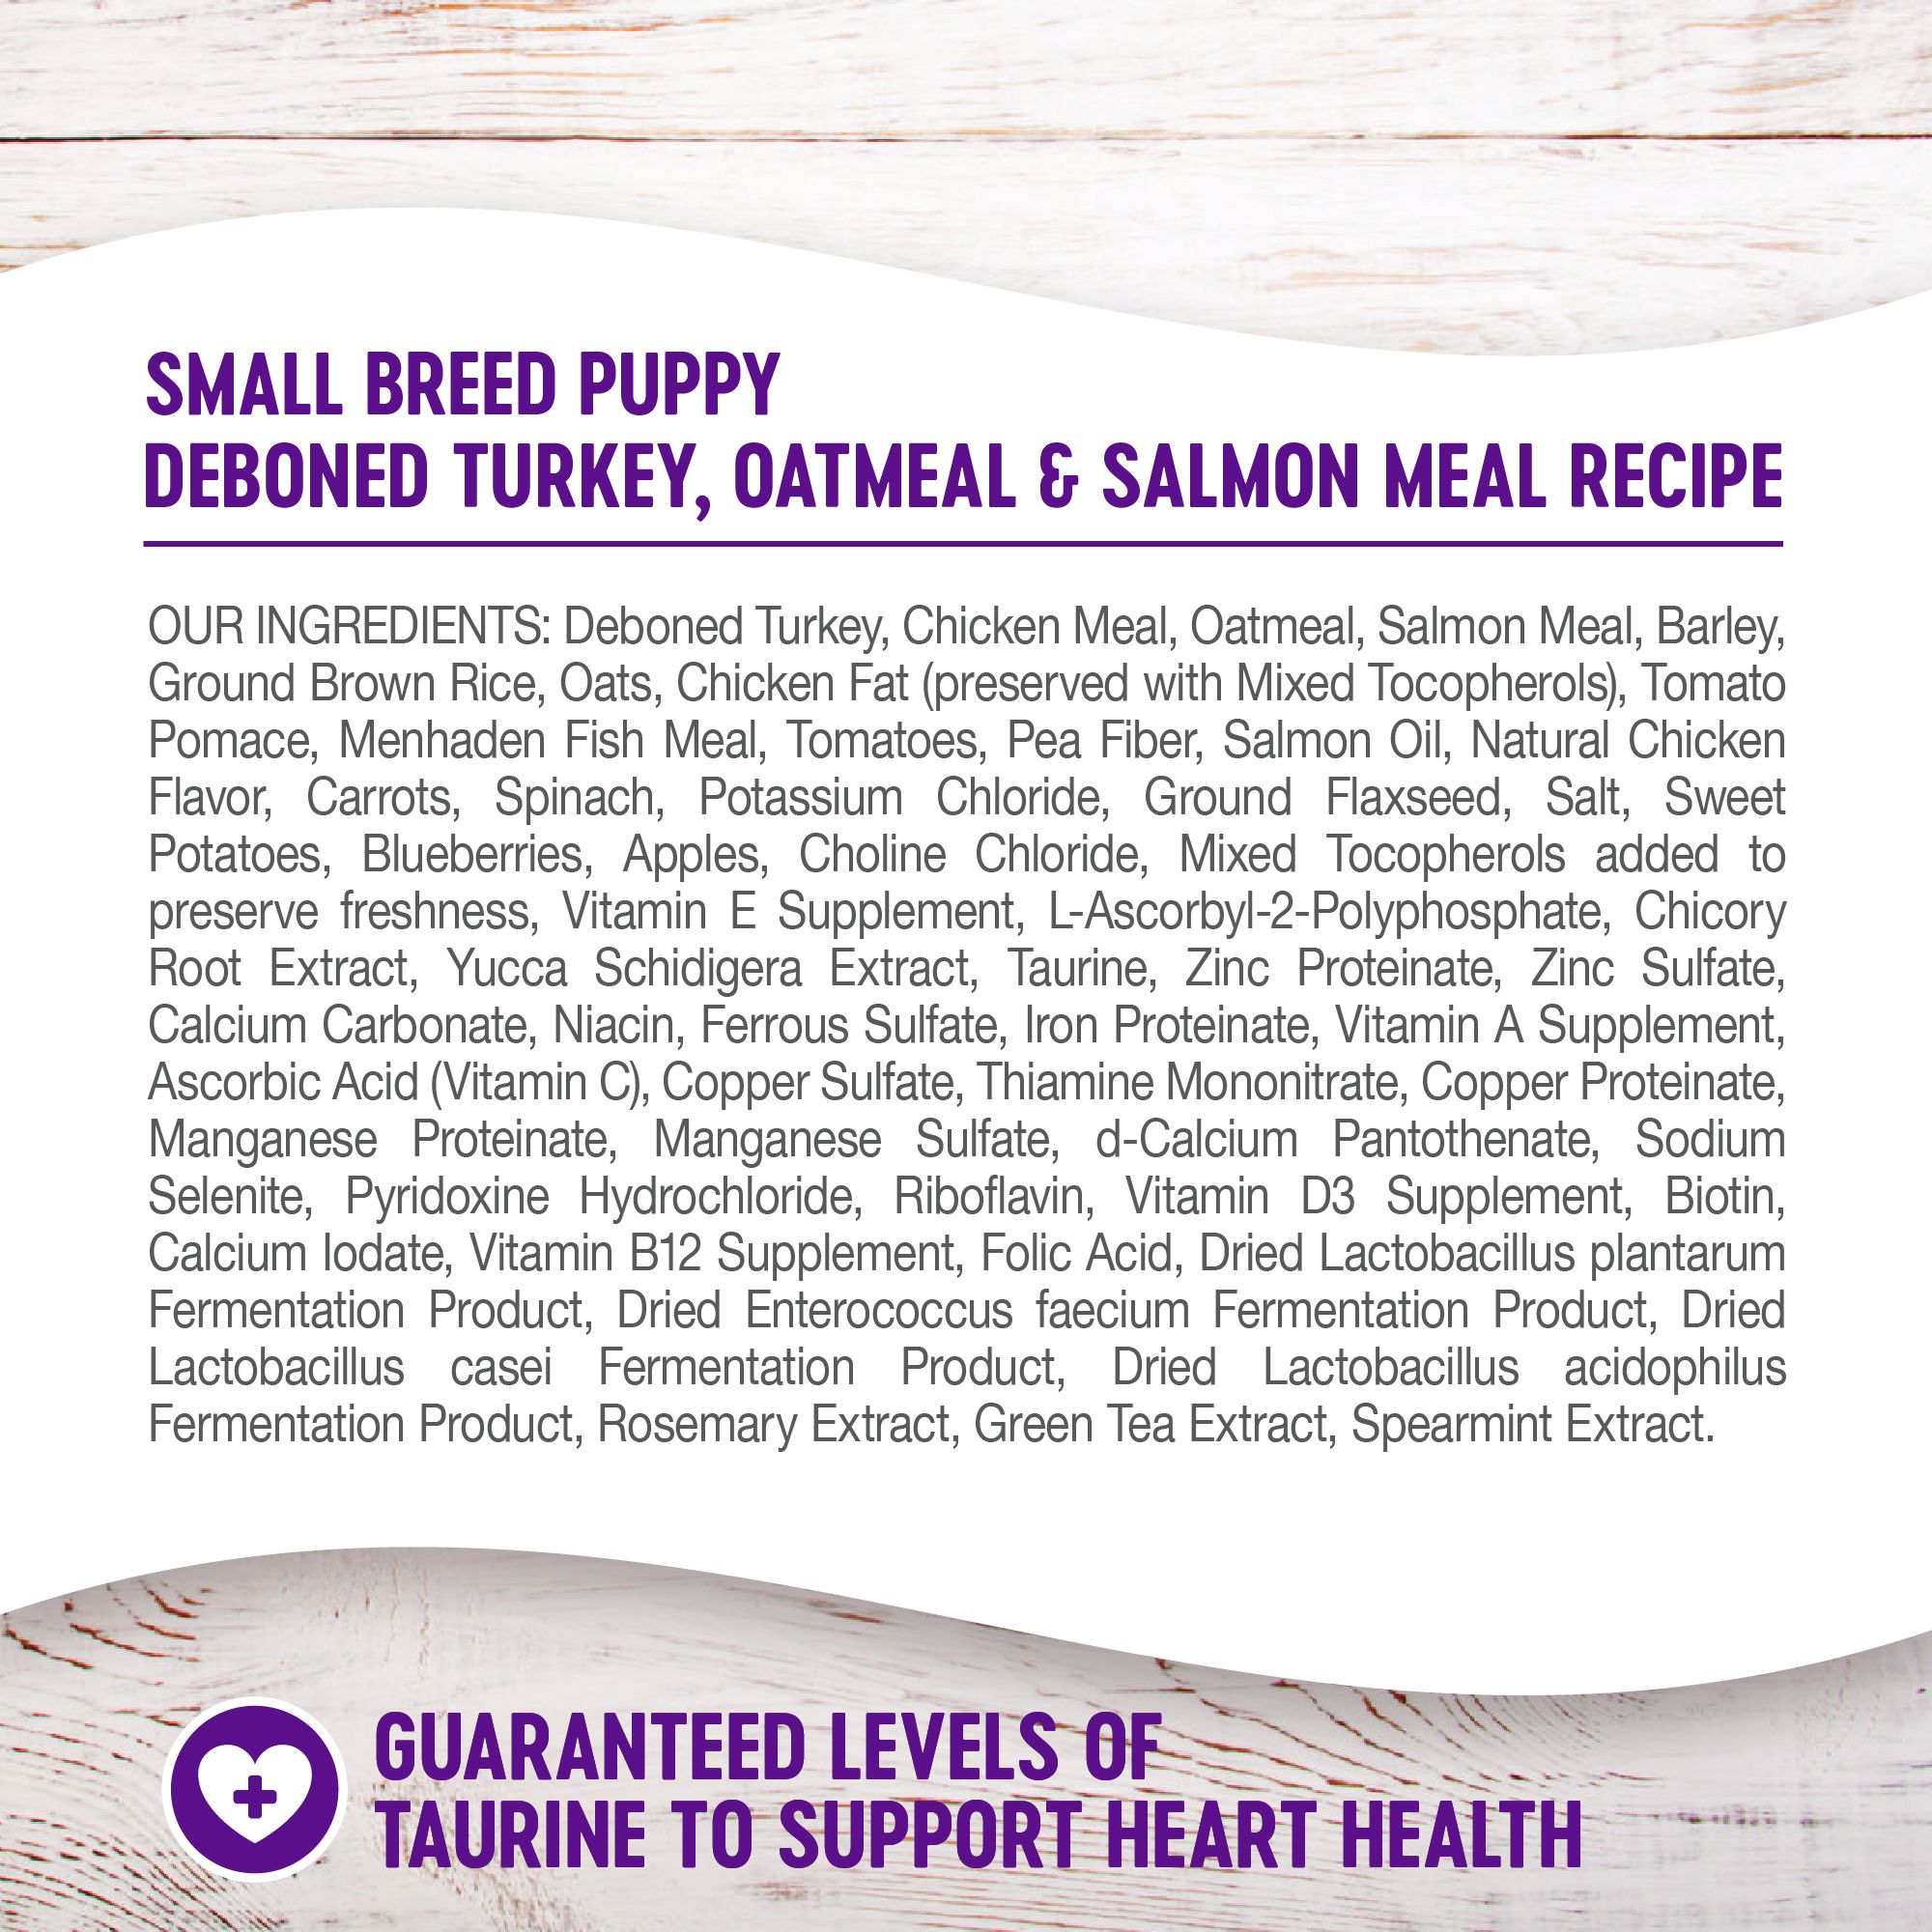 wellness complete health small breed puppy